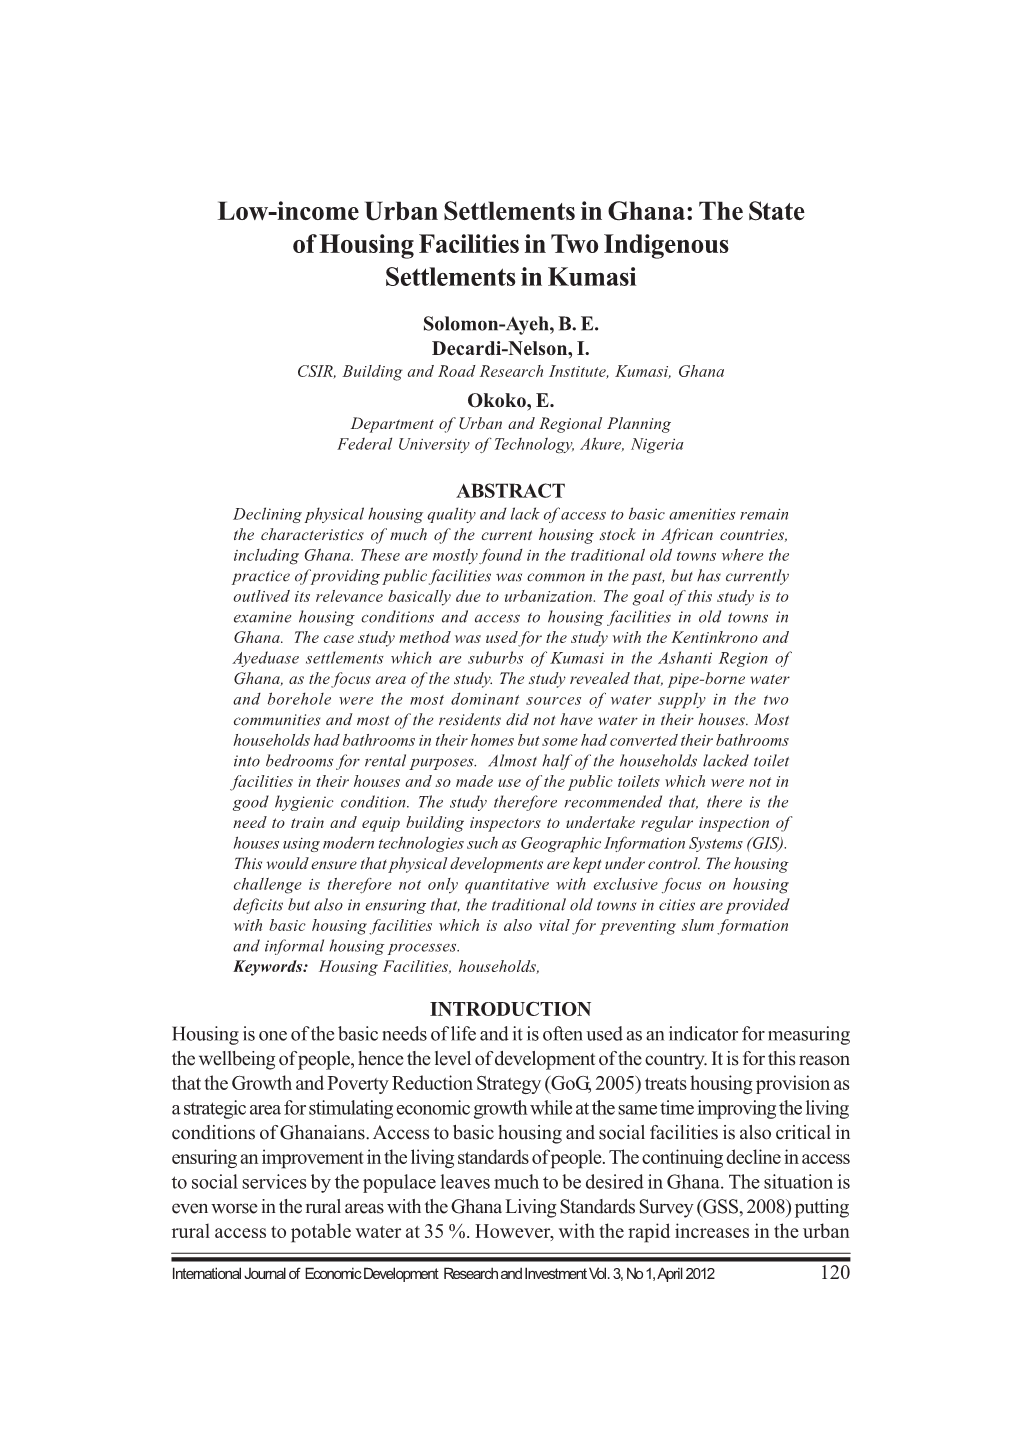 Low-Income Urban Settlements in Ghana: the State of Housing Facilities in Two Indigenous Settlements in Kumasi